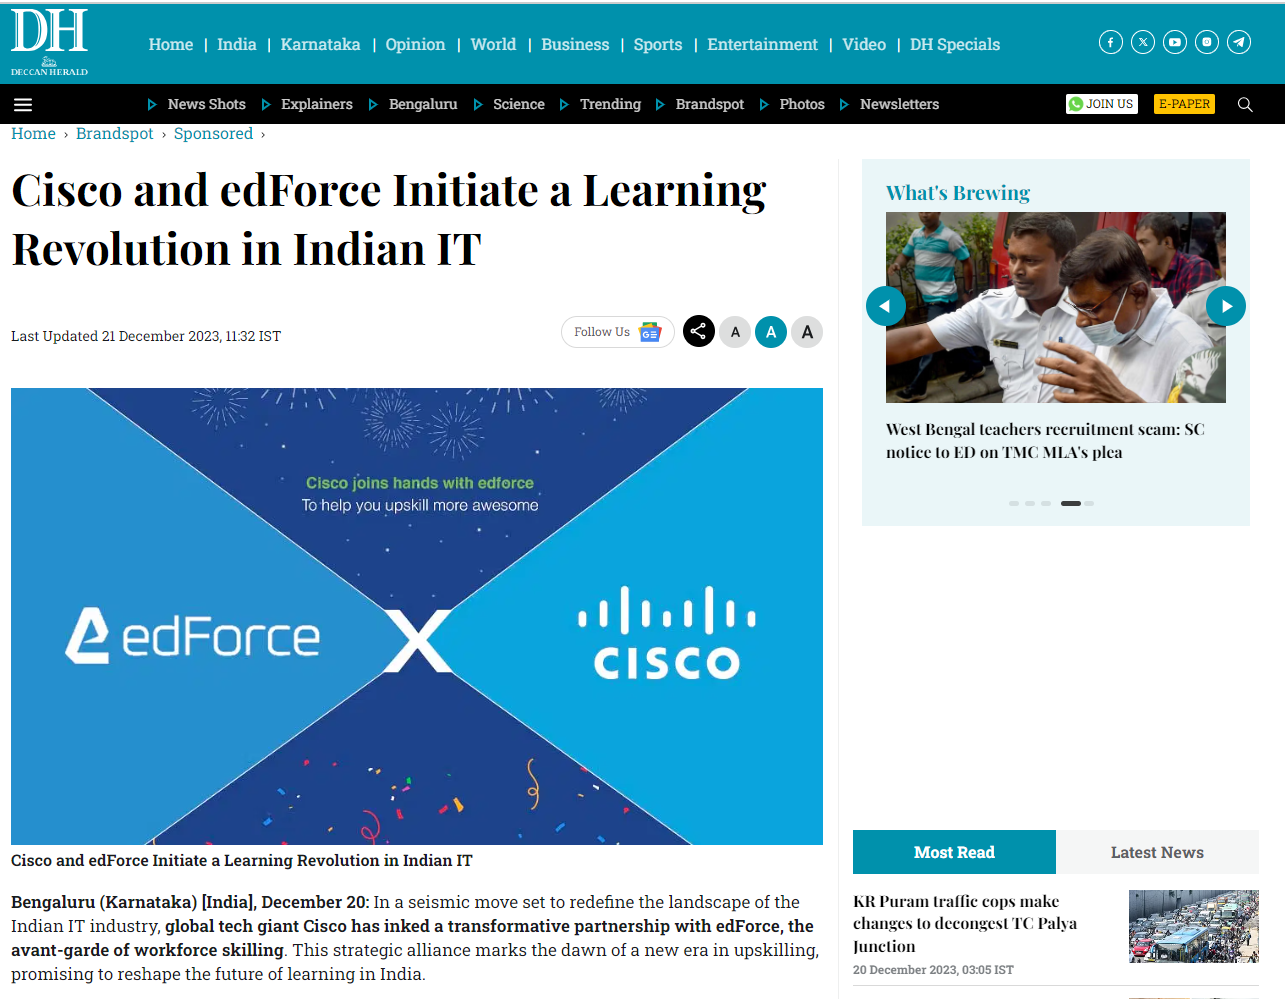 Cisco and edForce Initiate a Learning Revolution in Indian IT